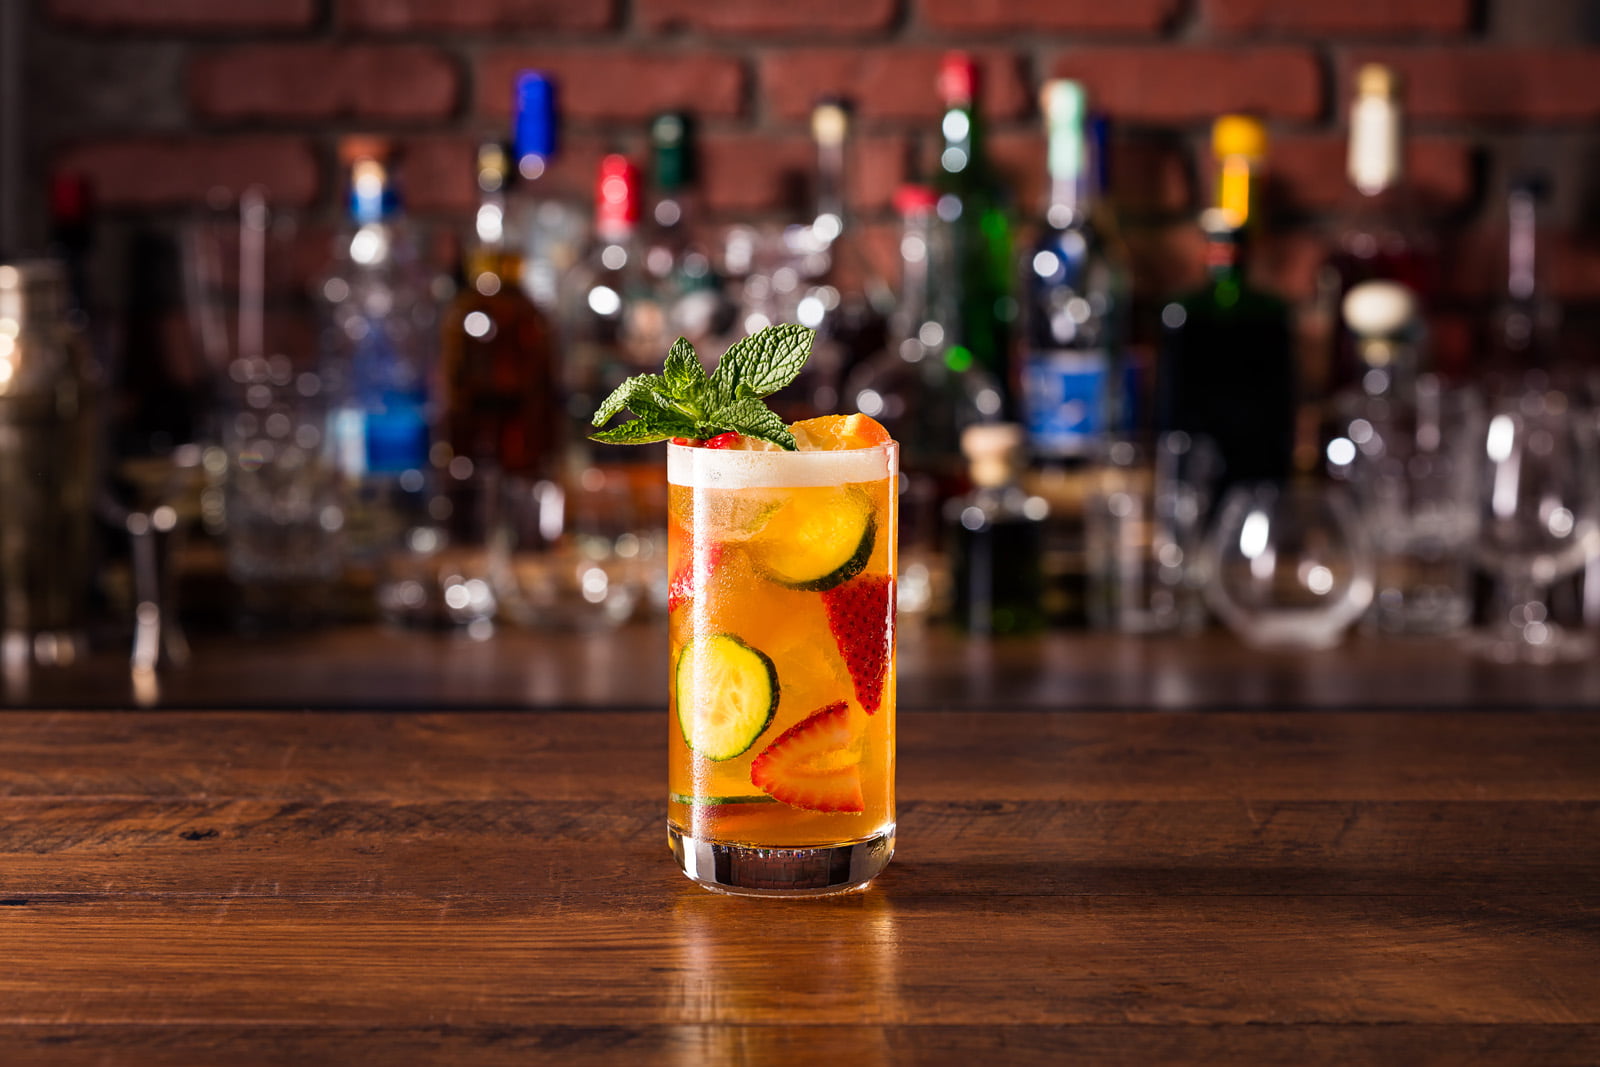 Pimm's Cup Cocktail Recipe